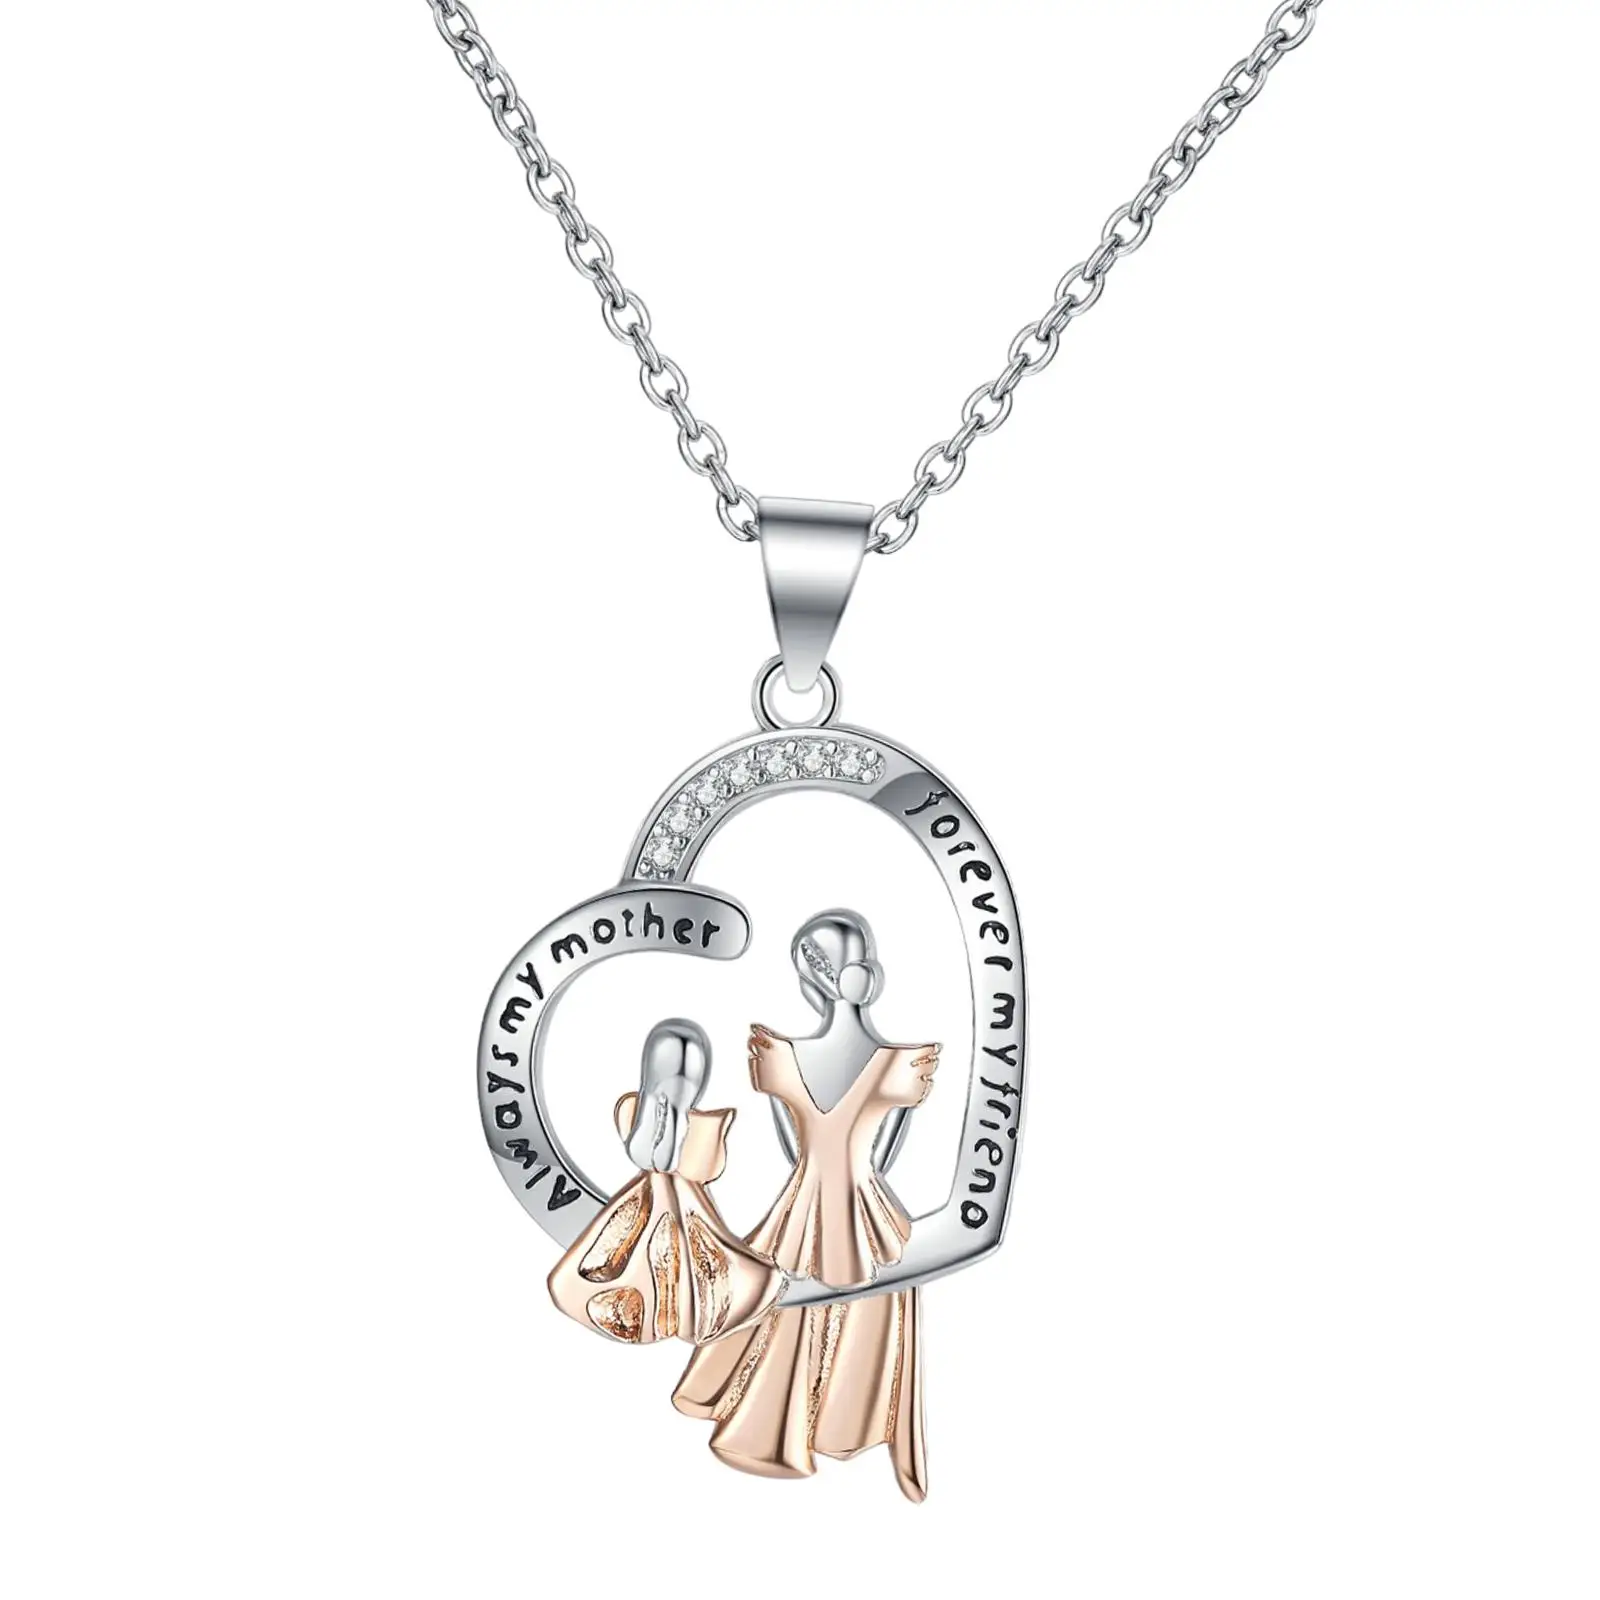 Mother`s Day Necklace Mother`s Day Gifts for Mom Women`s Necklace for Anniversary Engagements Graduation Ceremonies Festival